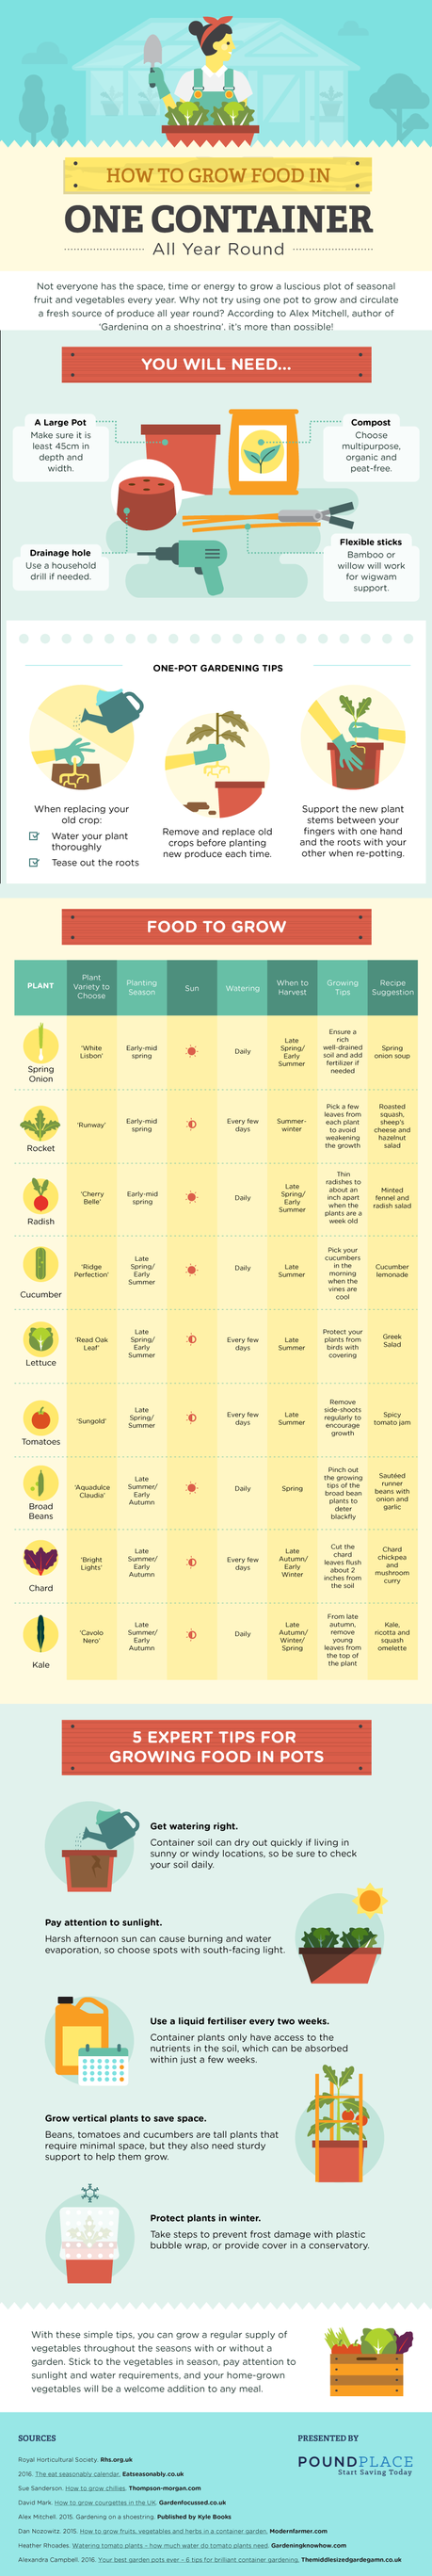 How to grow food all year round - infographic